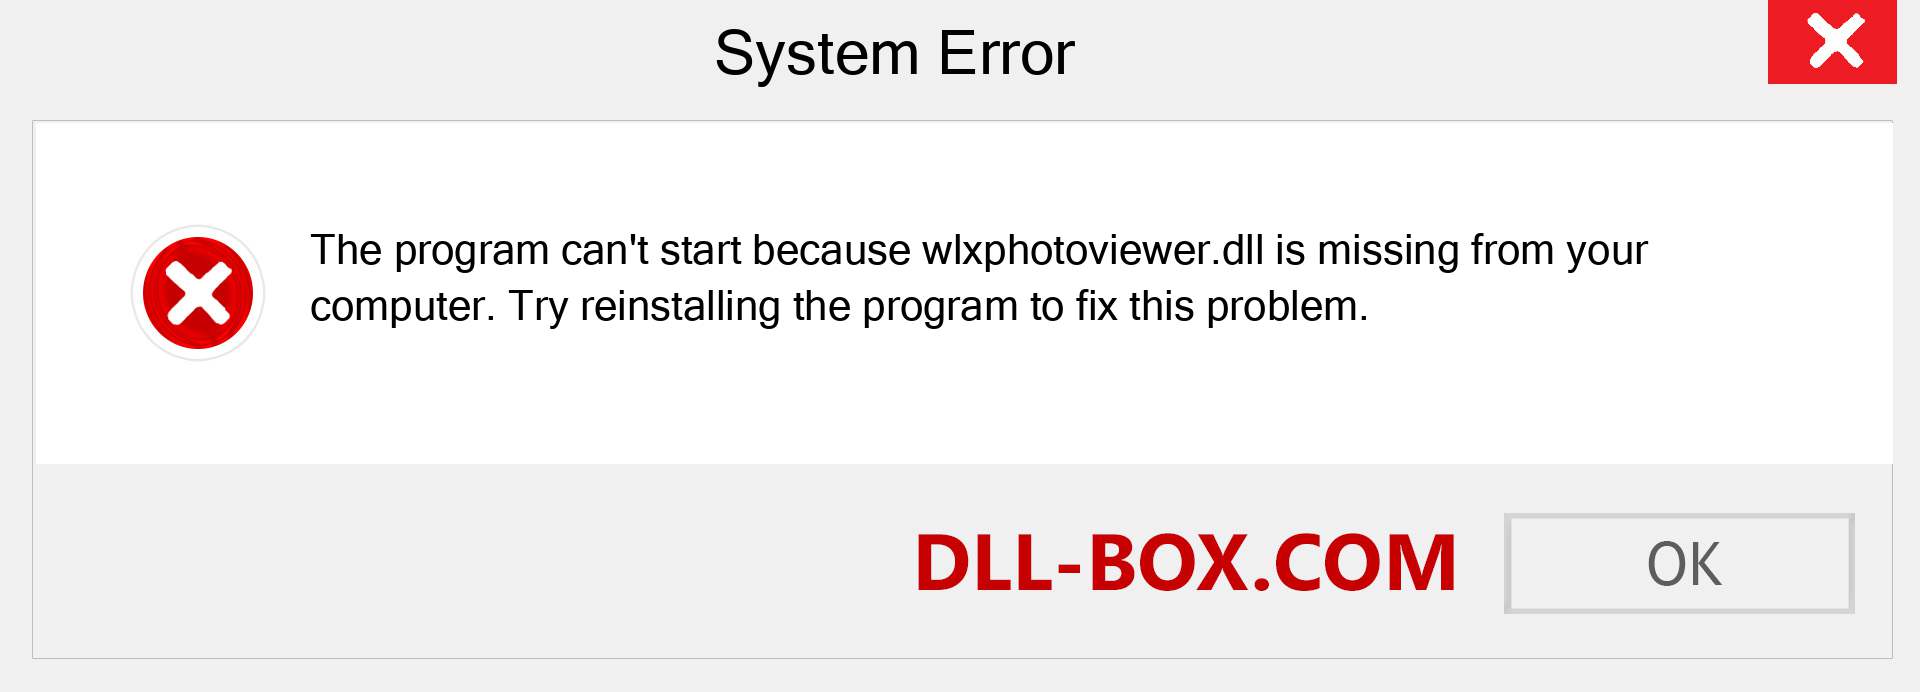  wlxphotoviewer.dll file is missing?. Download for Windows 7, 8, 10 - Fix  wlxphotoviewer dll Missing Error on Windows, photos, images